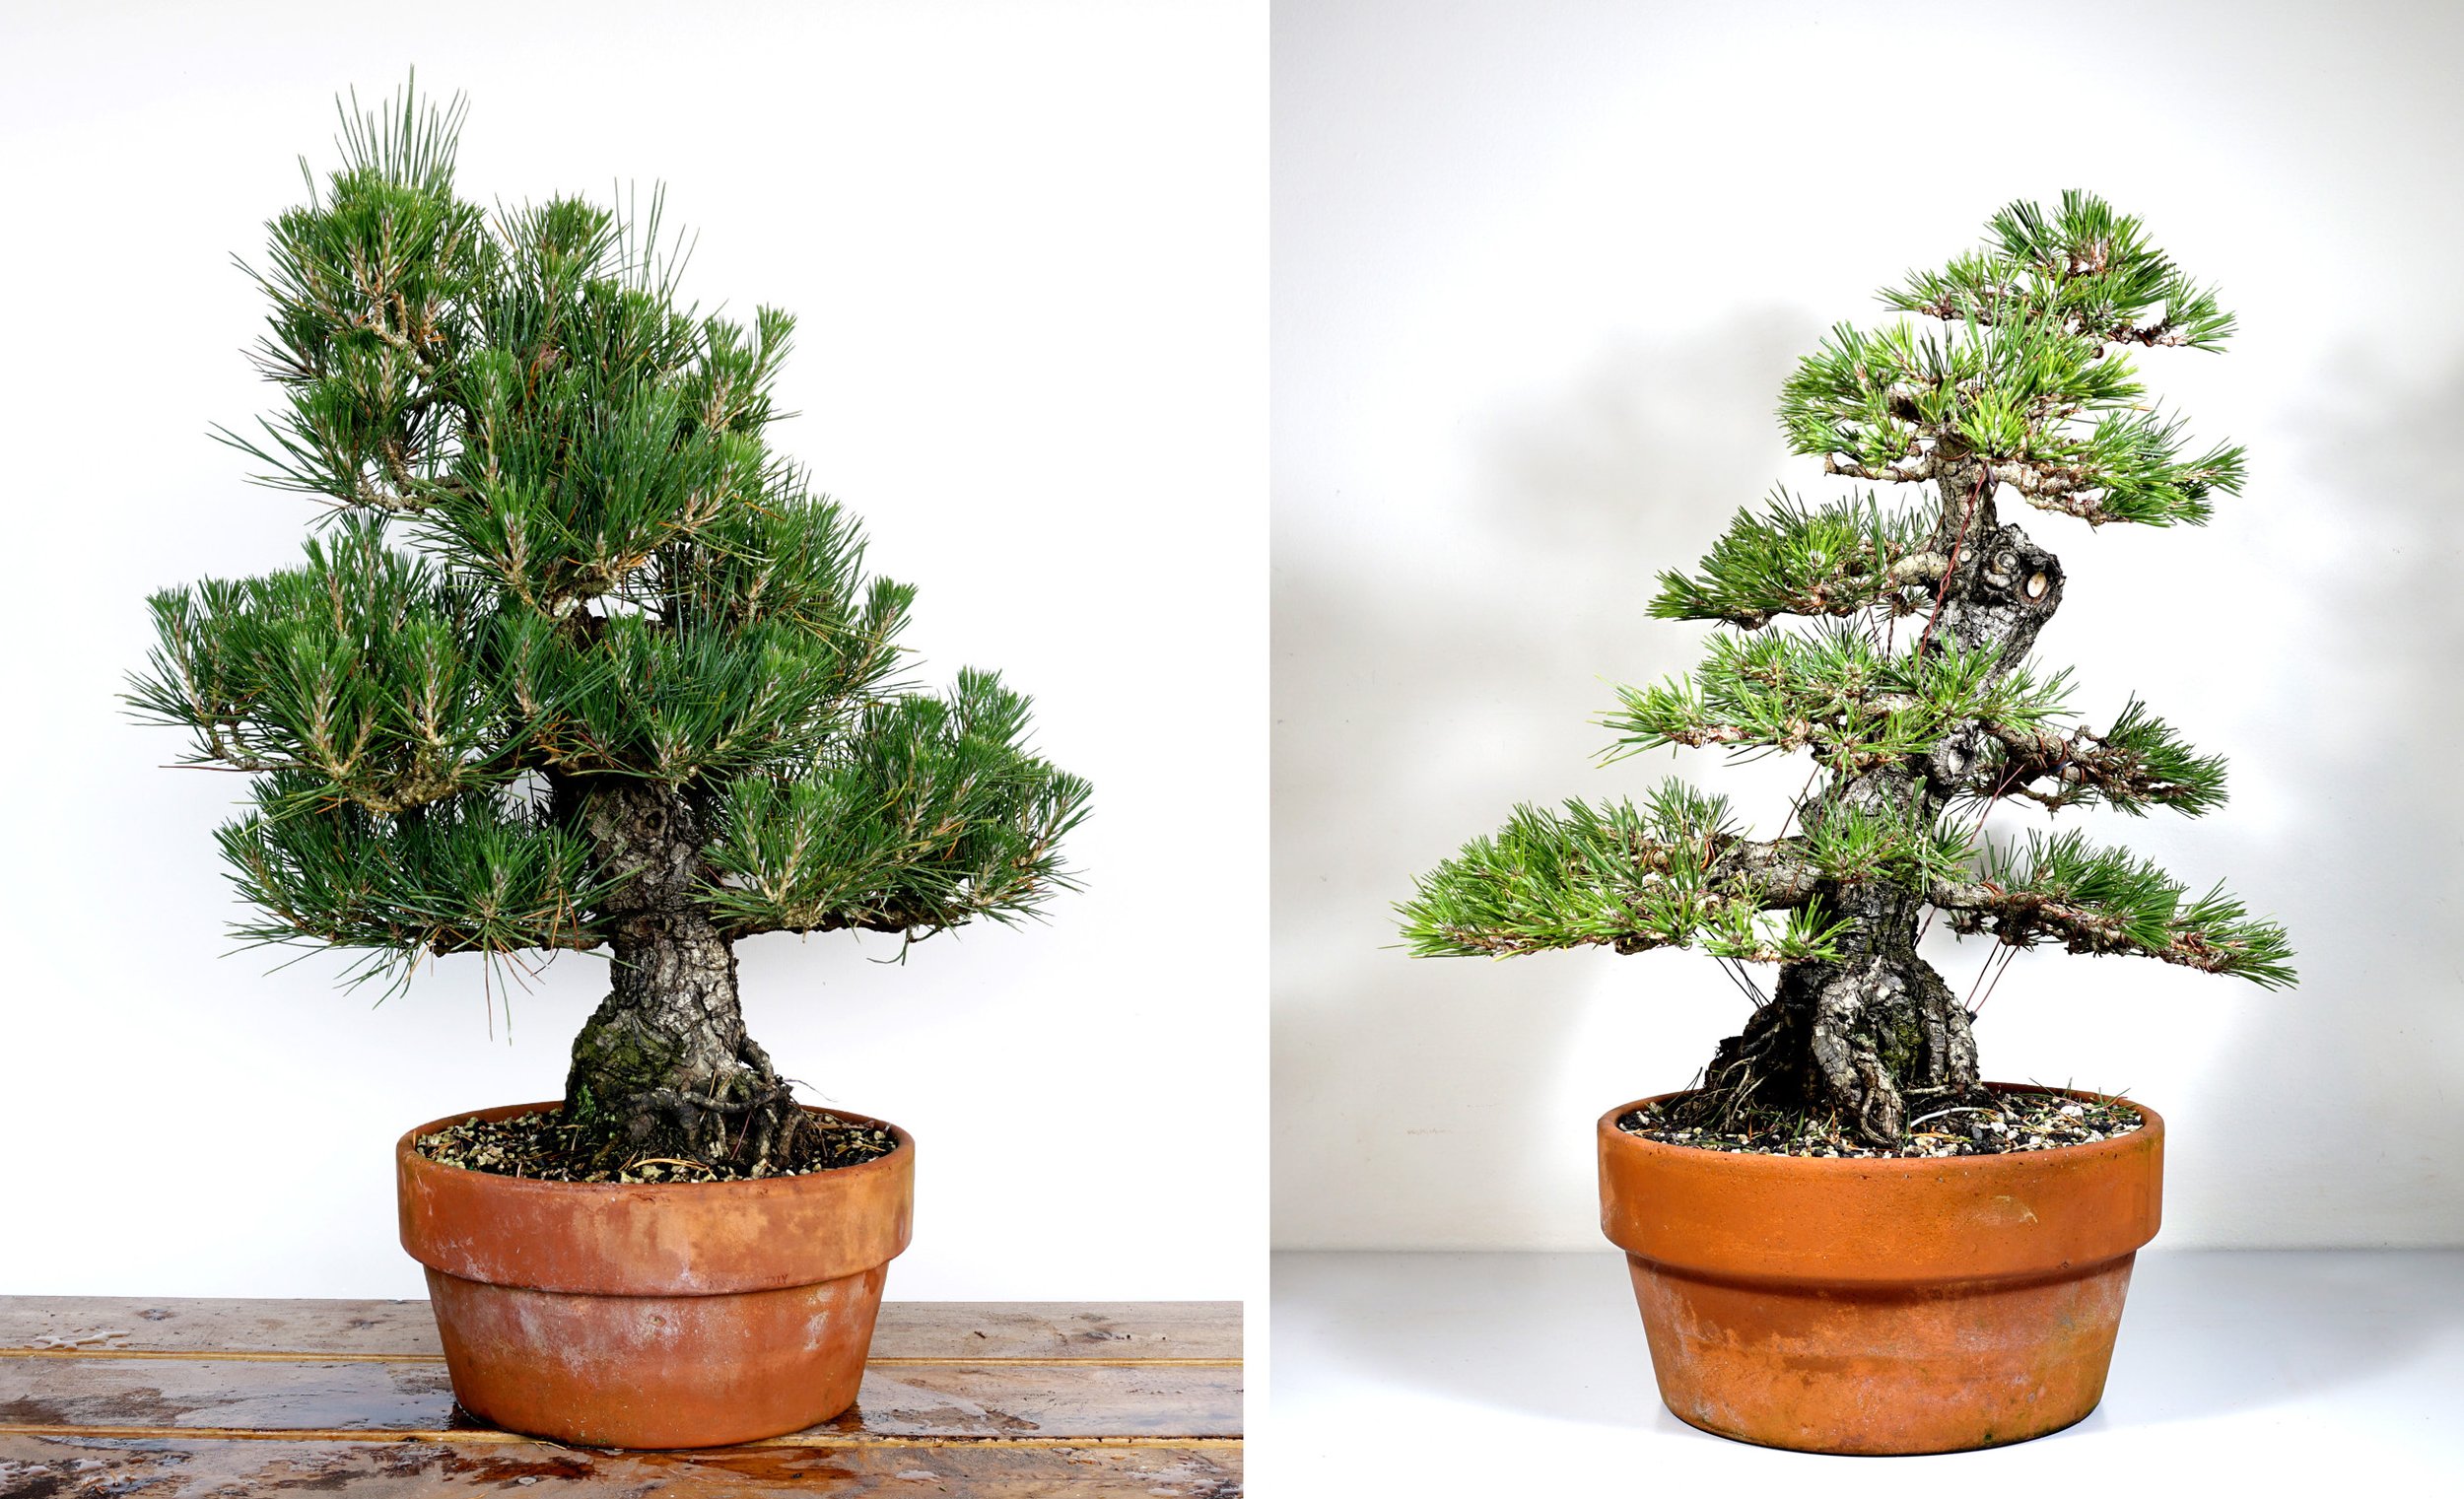 Black Pine 4 Before and After.jpg